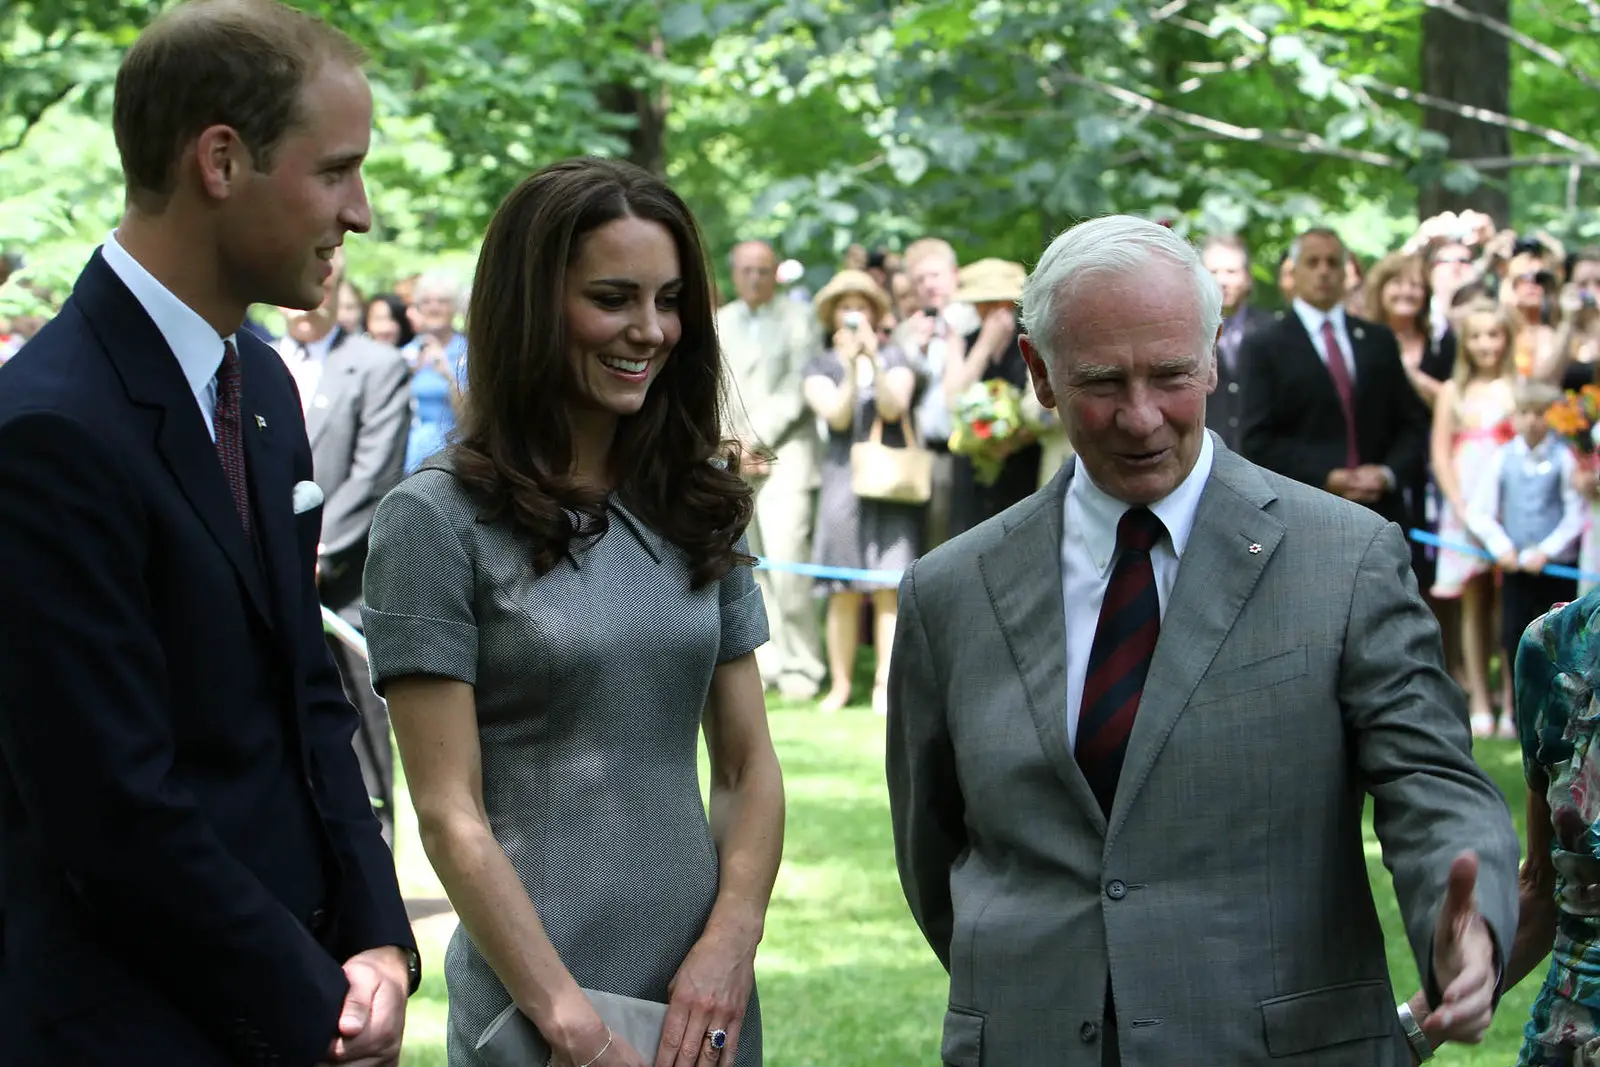 The Duke and Duchess of Cambridge planted a tree at the Rideau Hall